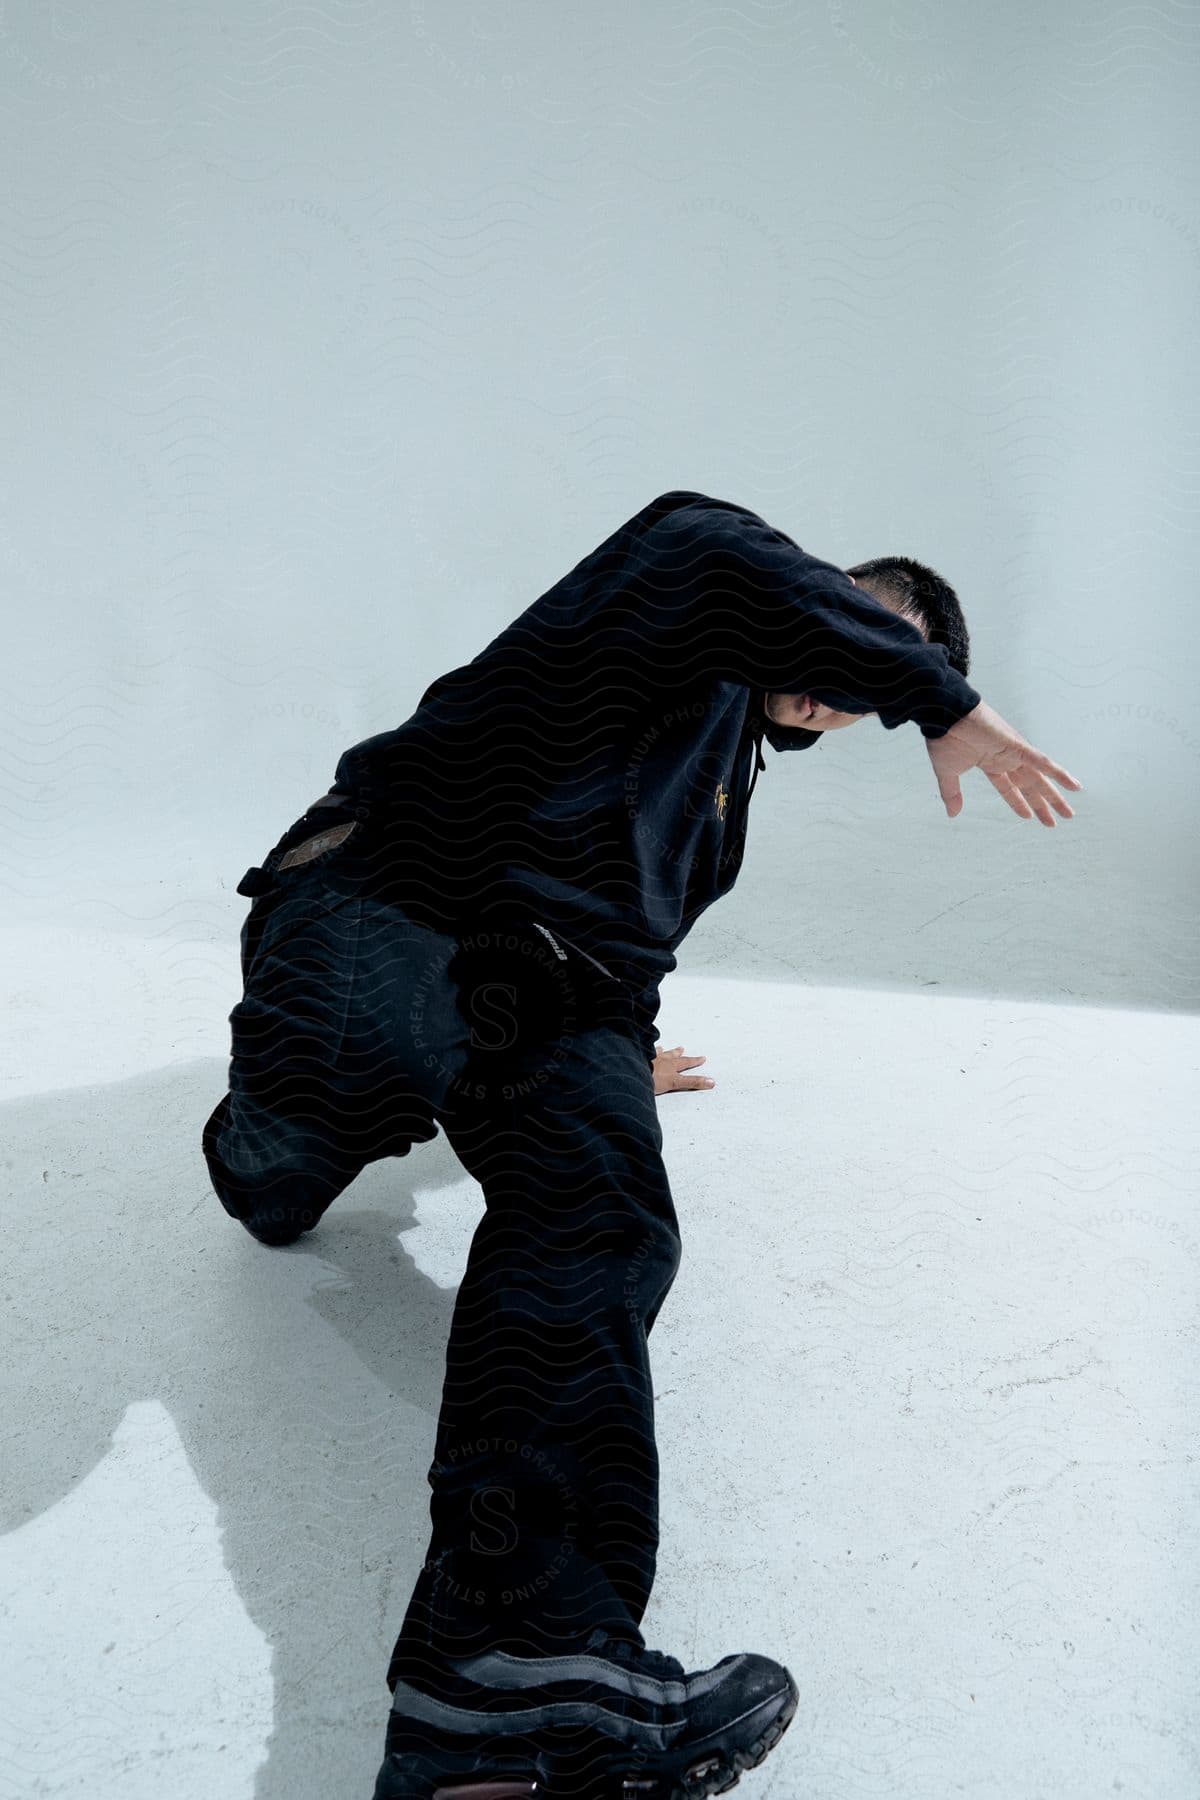 Stock photo of a person is captured mid-movement in a dance pose, wearing a black outfit against a grey background.